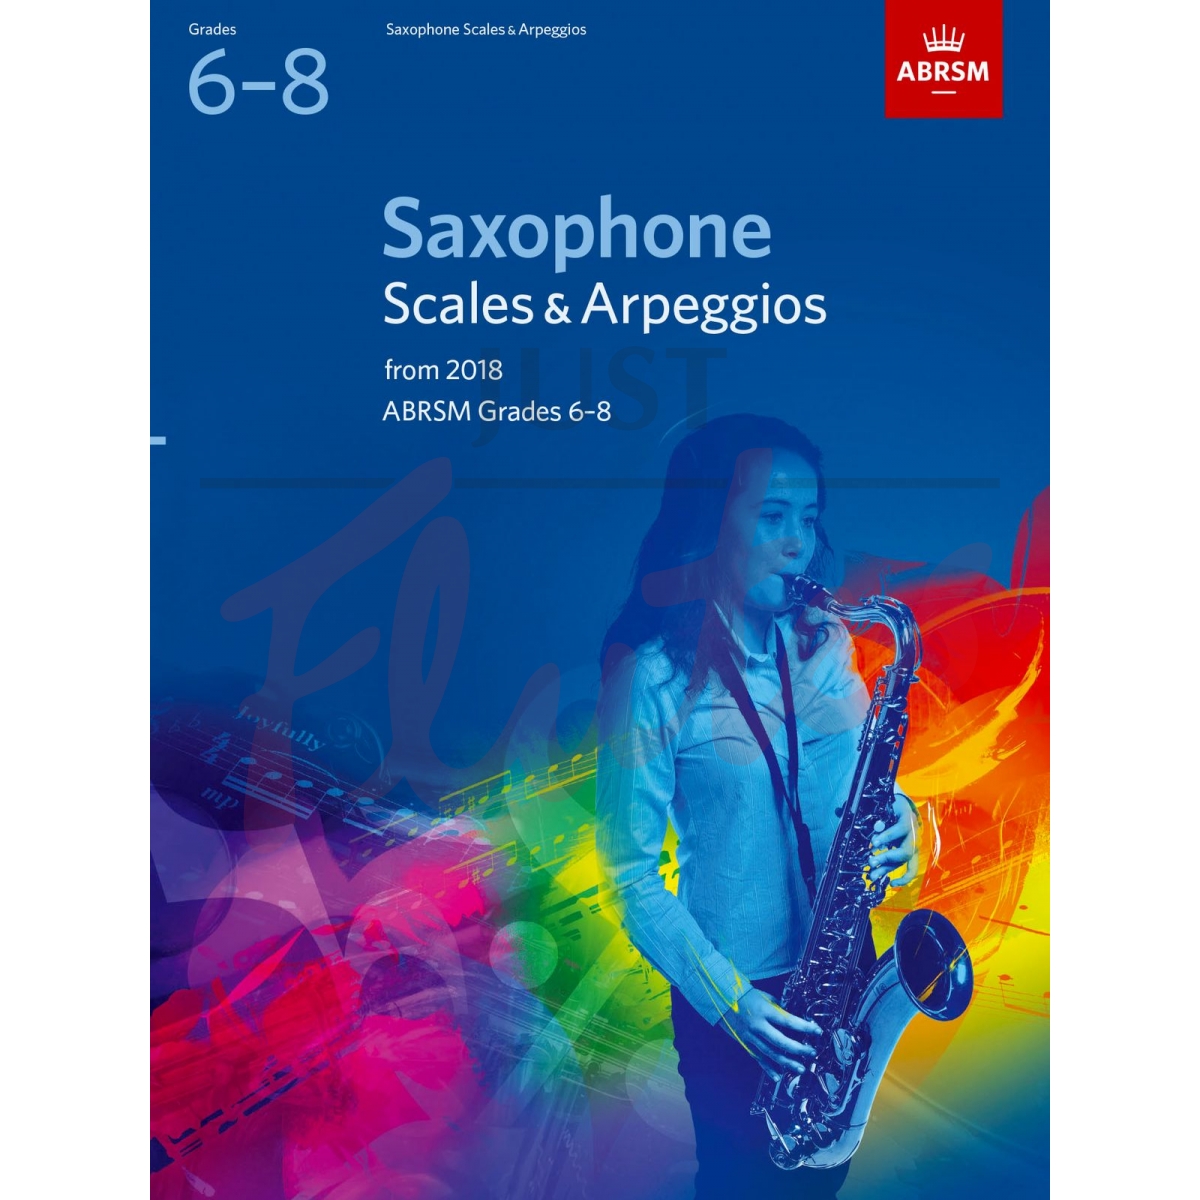 Scales &amp; Arpeggios Grades 6-8 (from 2018) [Saxophone]